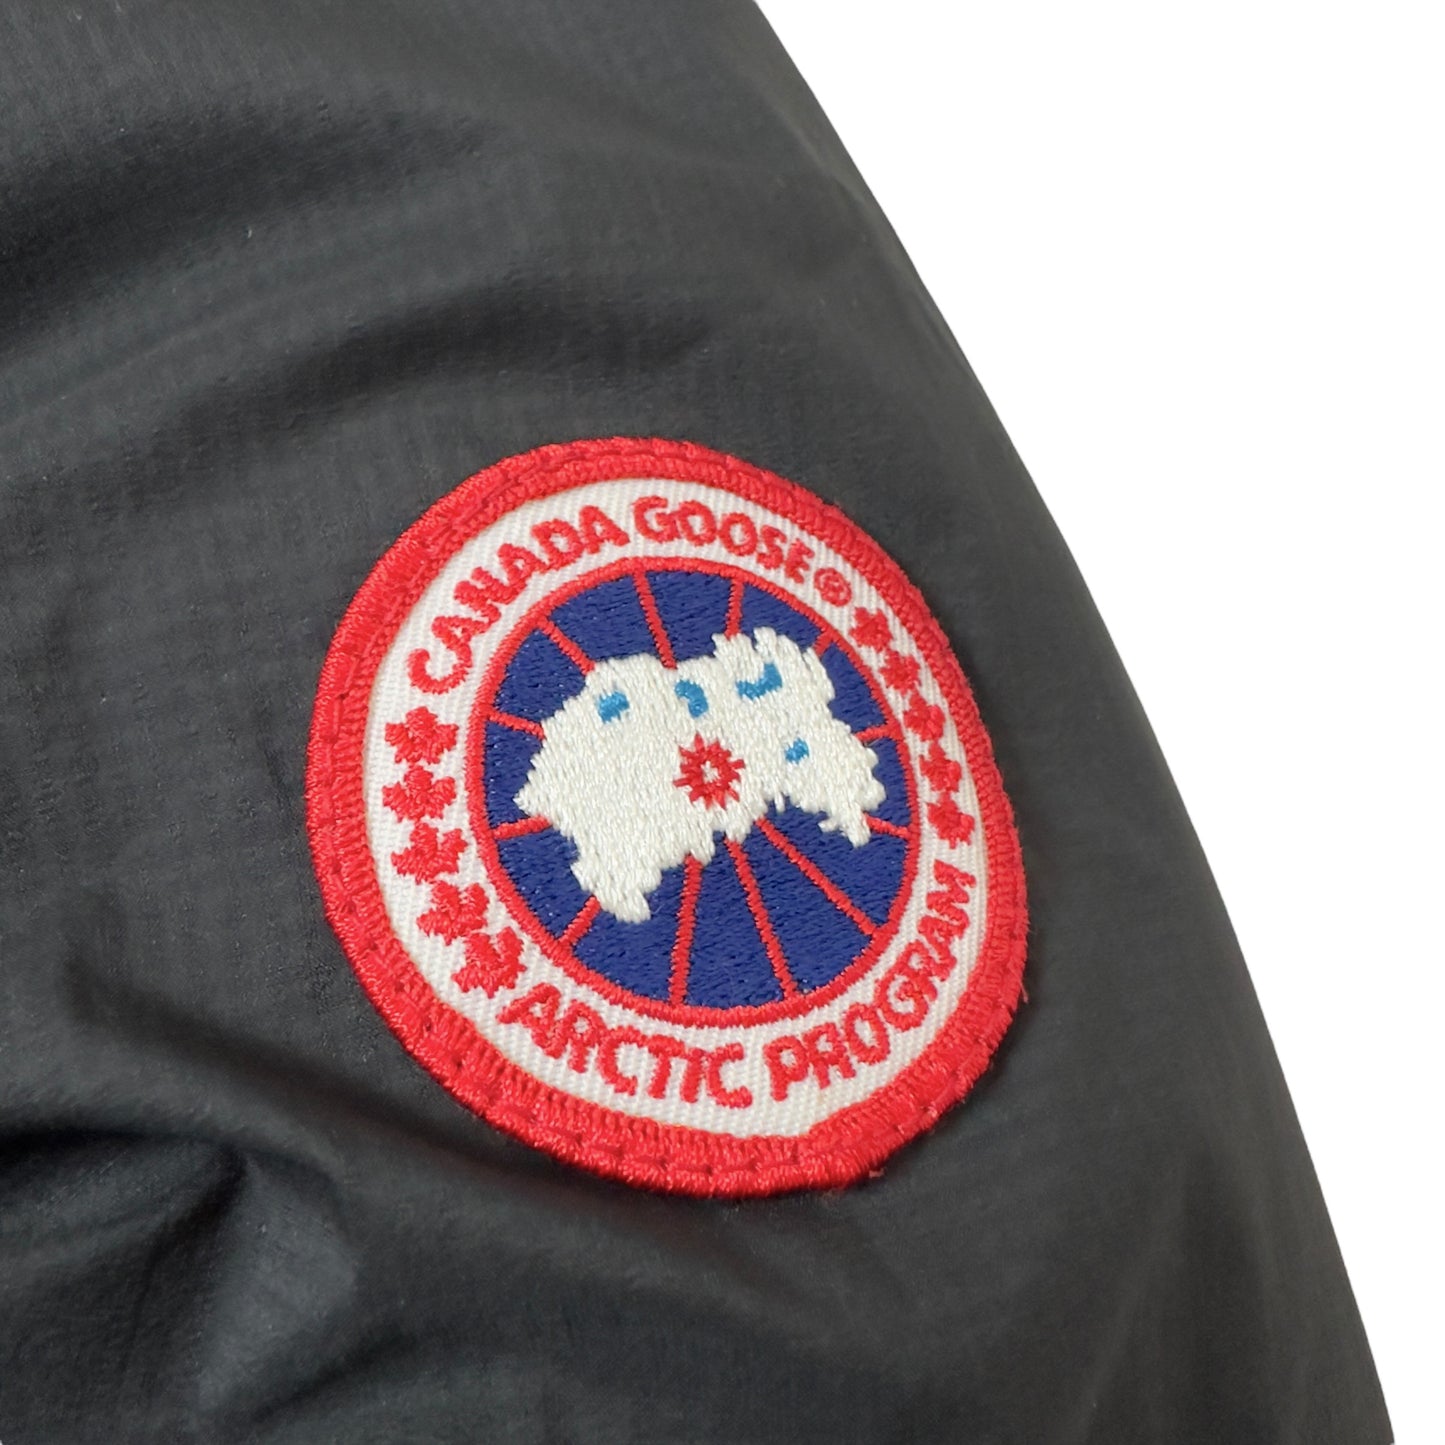 Canada Goose Lodge Packable Down Jacket